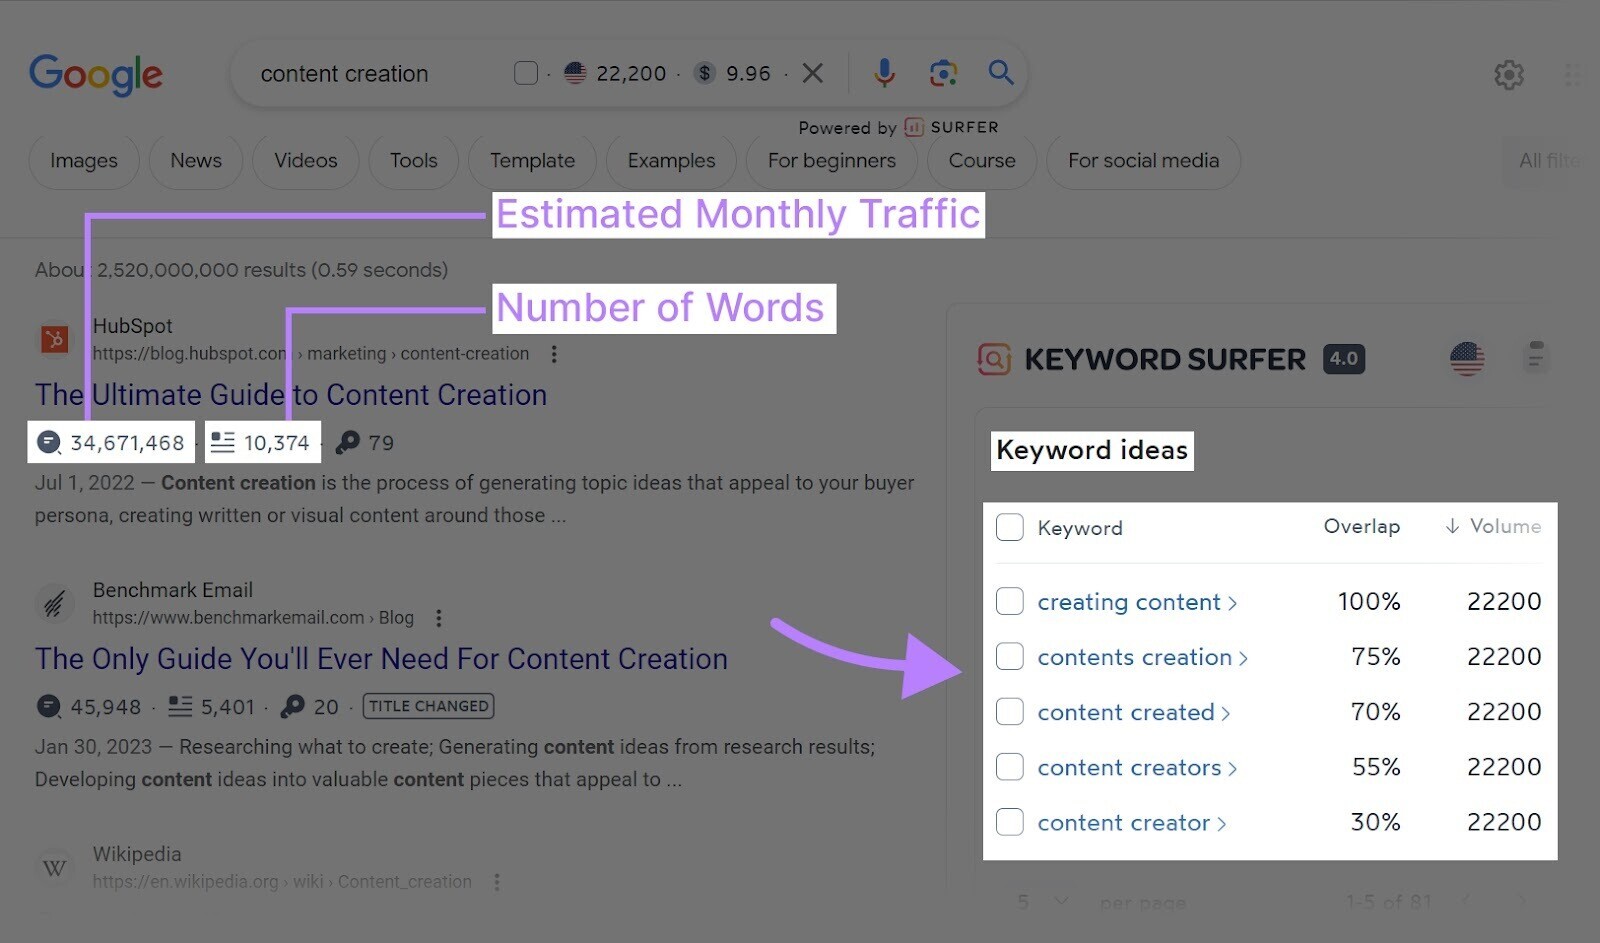 Google search with Keyword Surfer data, estimated monthly traffic, number of words and keyword ideas, overlayed